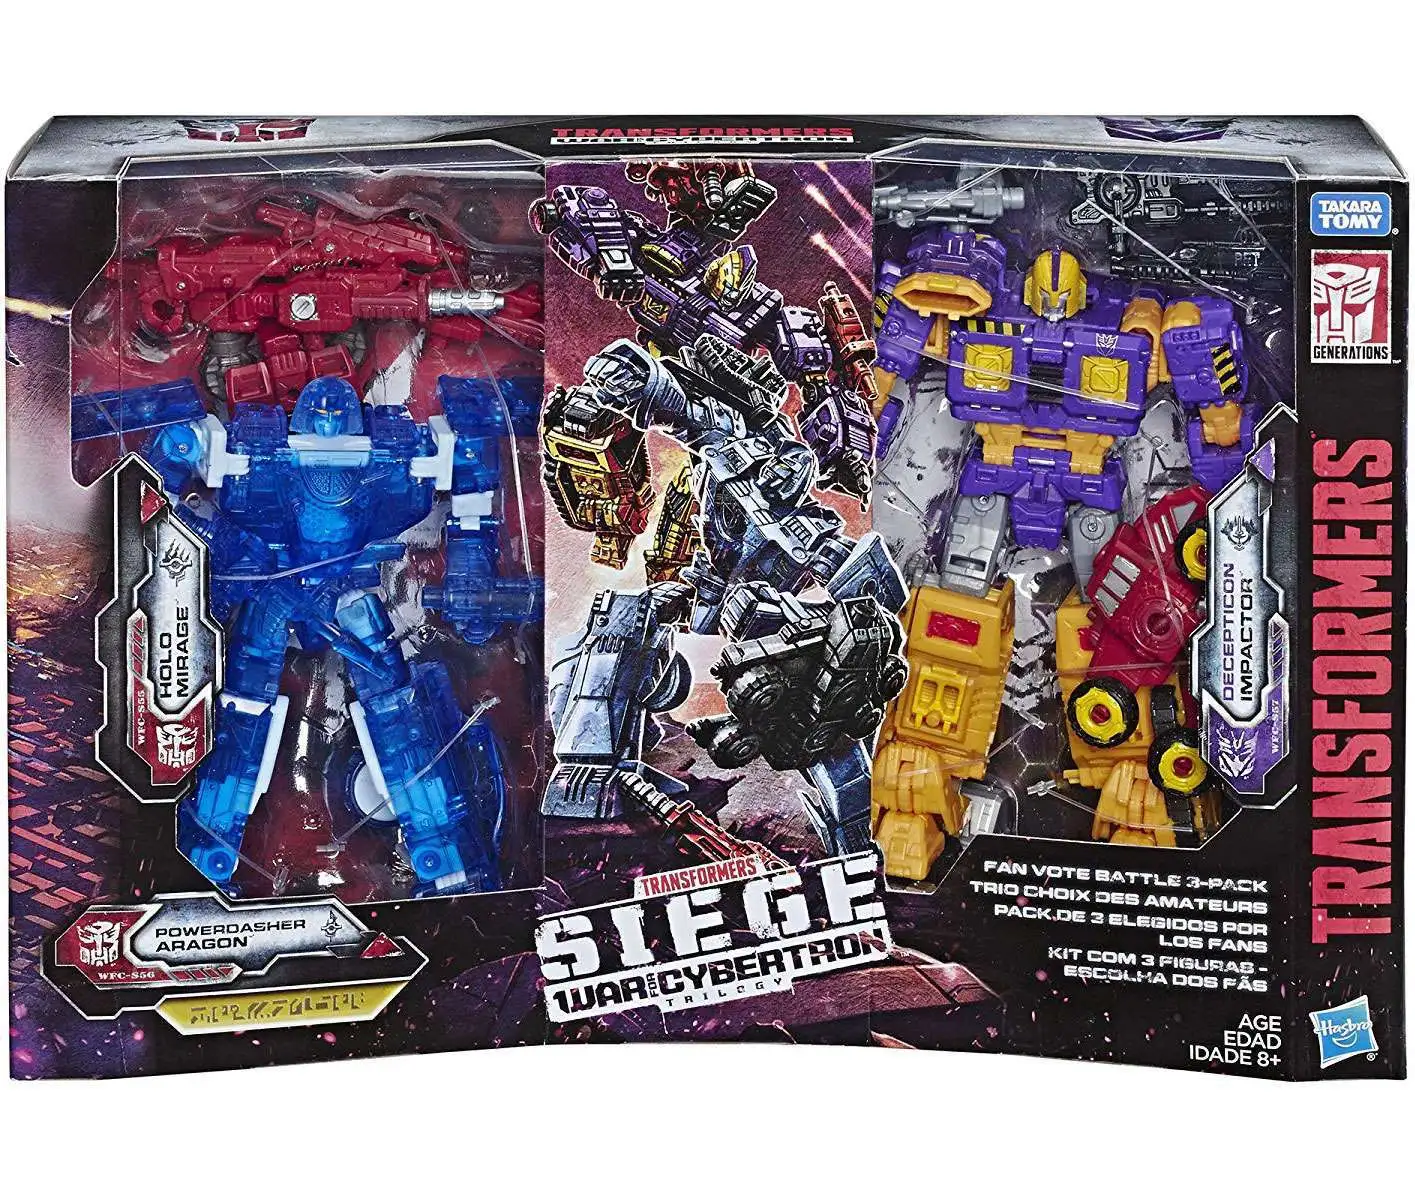 Transformers Siege War For Cybertron 6" Figure Deluxe Class Impactor IN STOCK! 